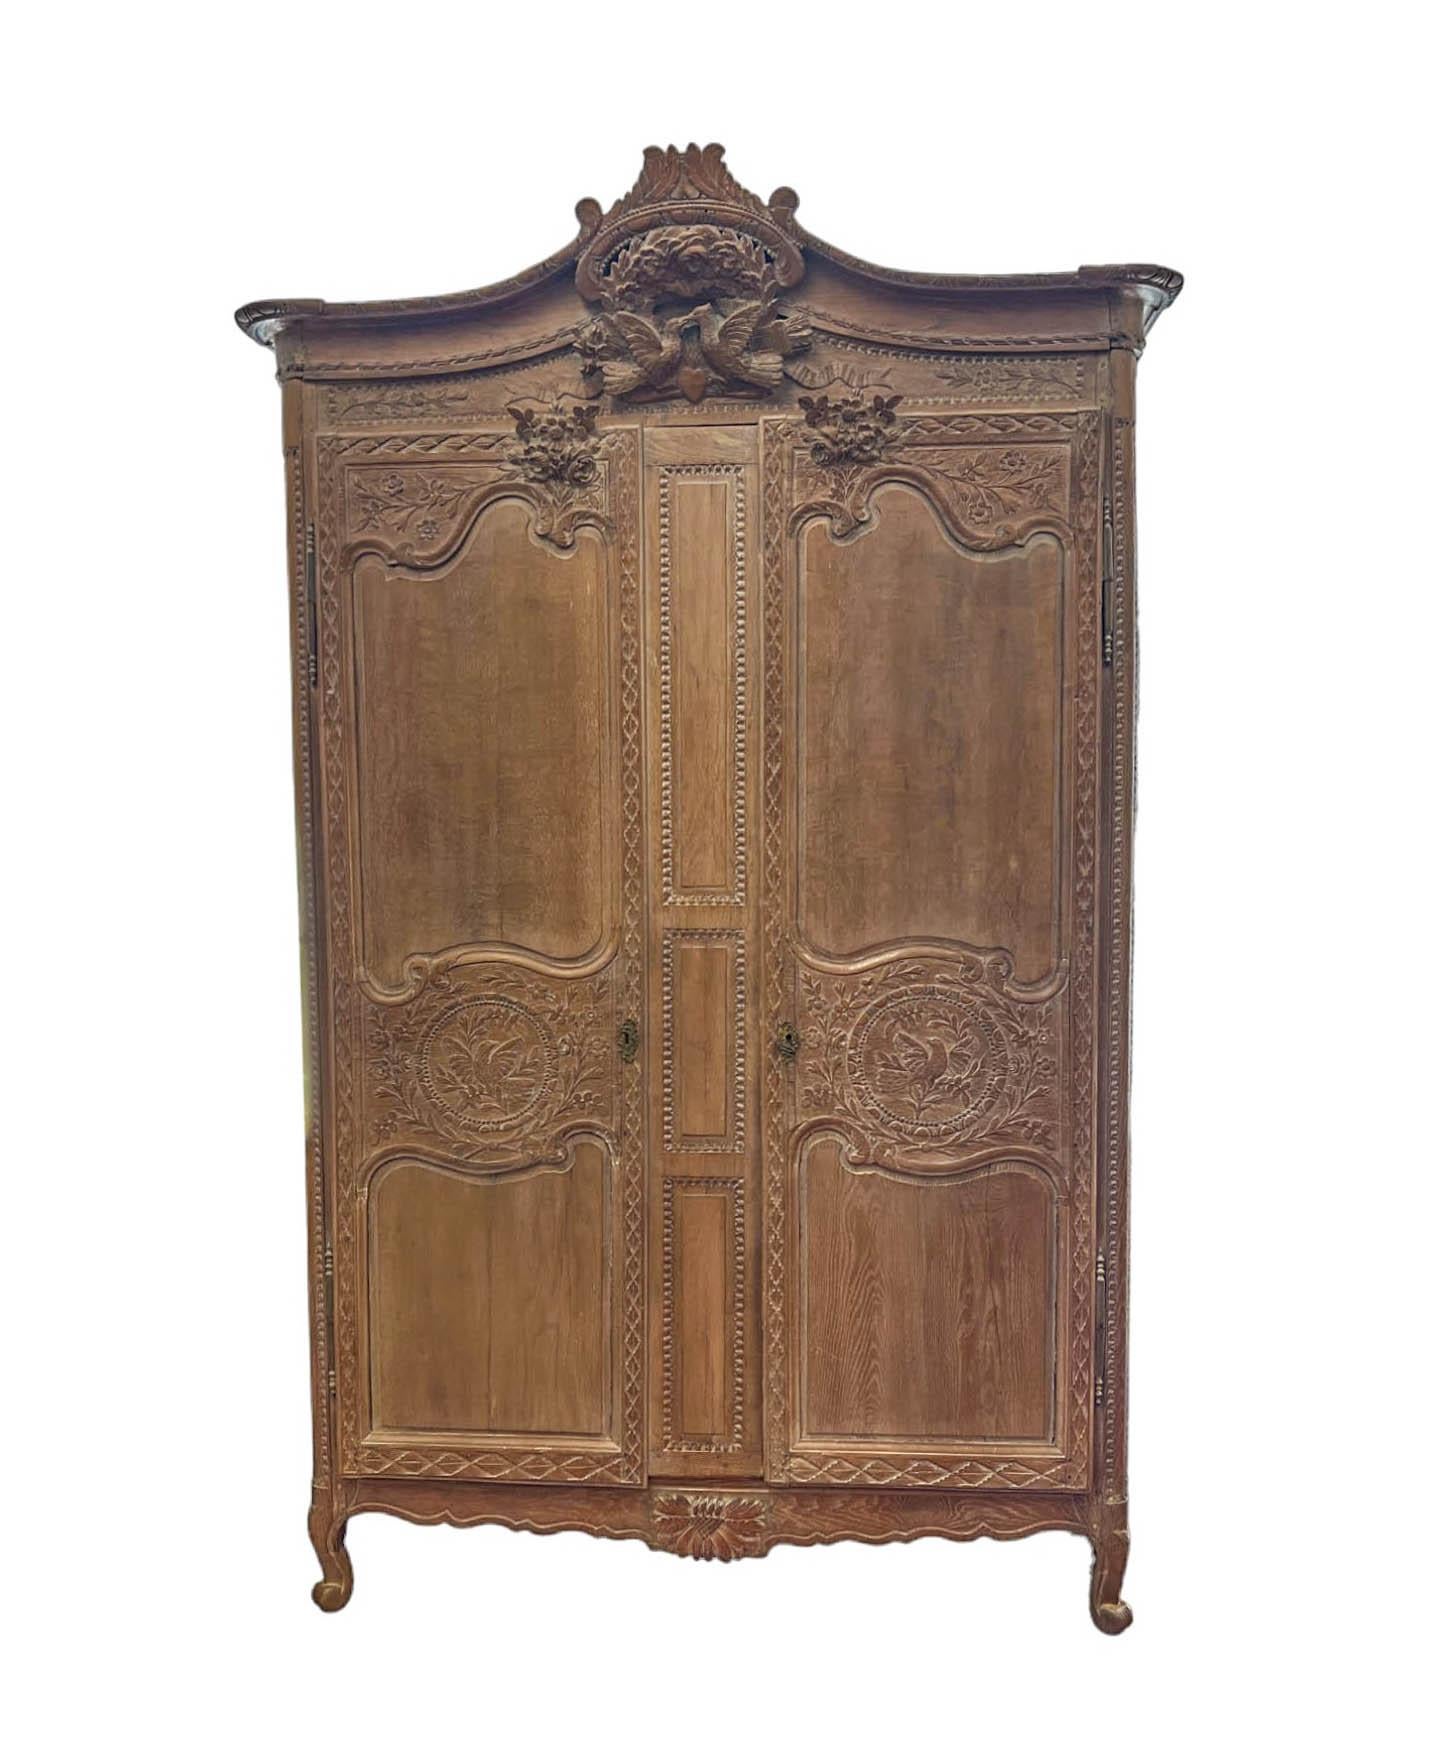 Introducing our Antique French Country Armoire in the Norman style de Bayeux, a timeless piece of history dating back to the mid to late 1800s. Crafted from oak using traditional peg construction techniques, this armoire has been transformed into a